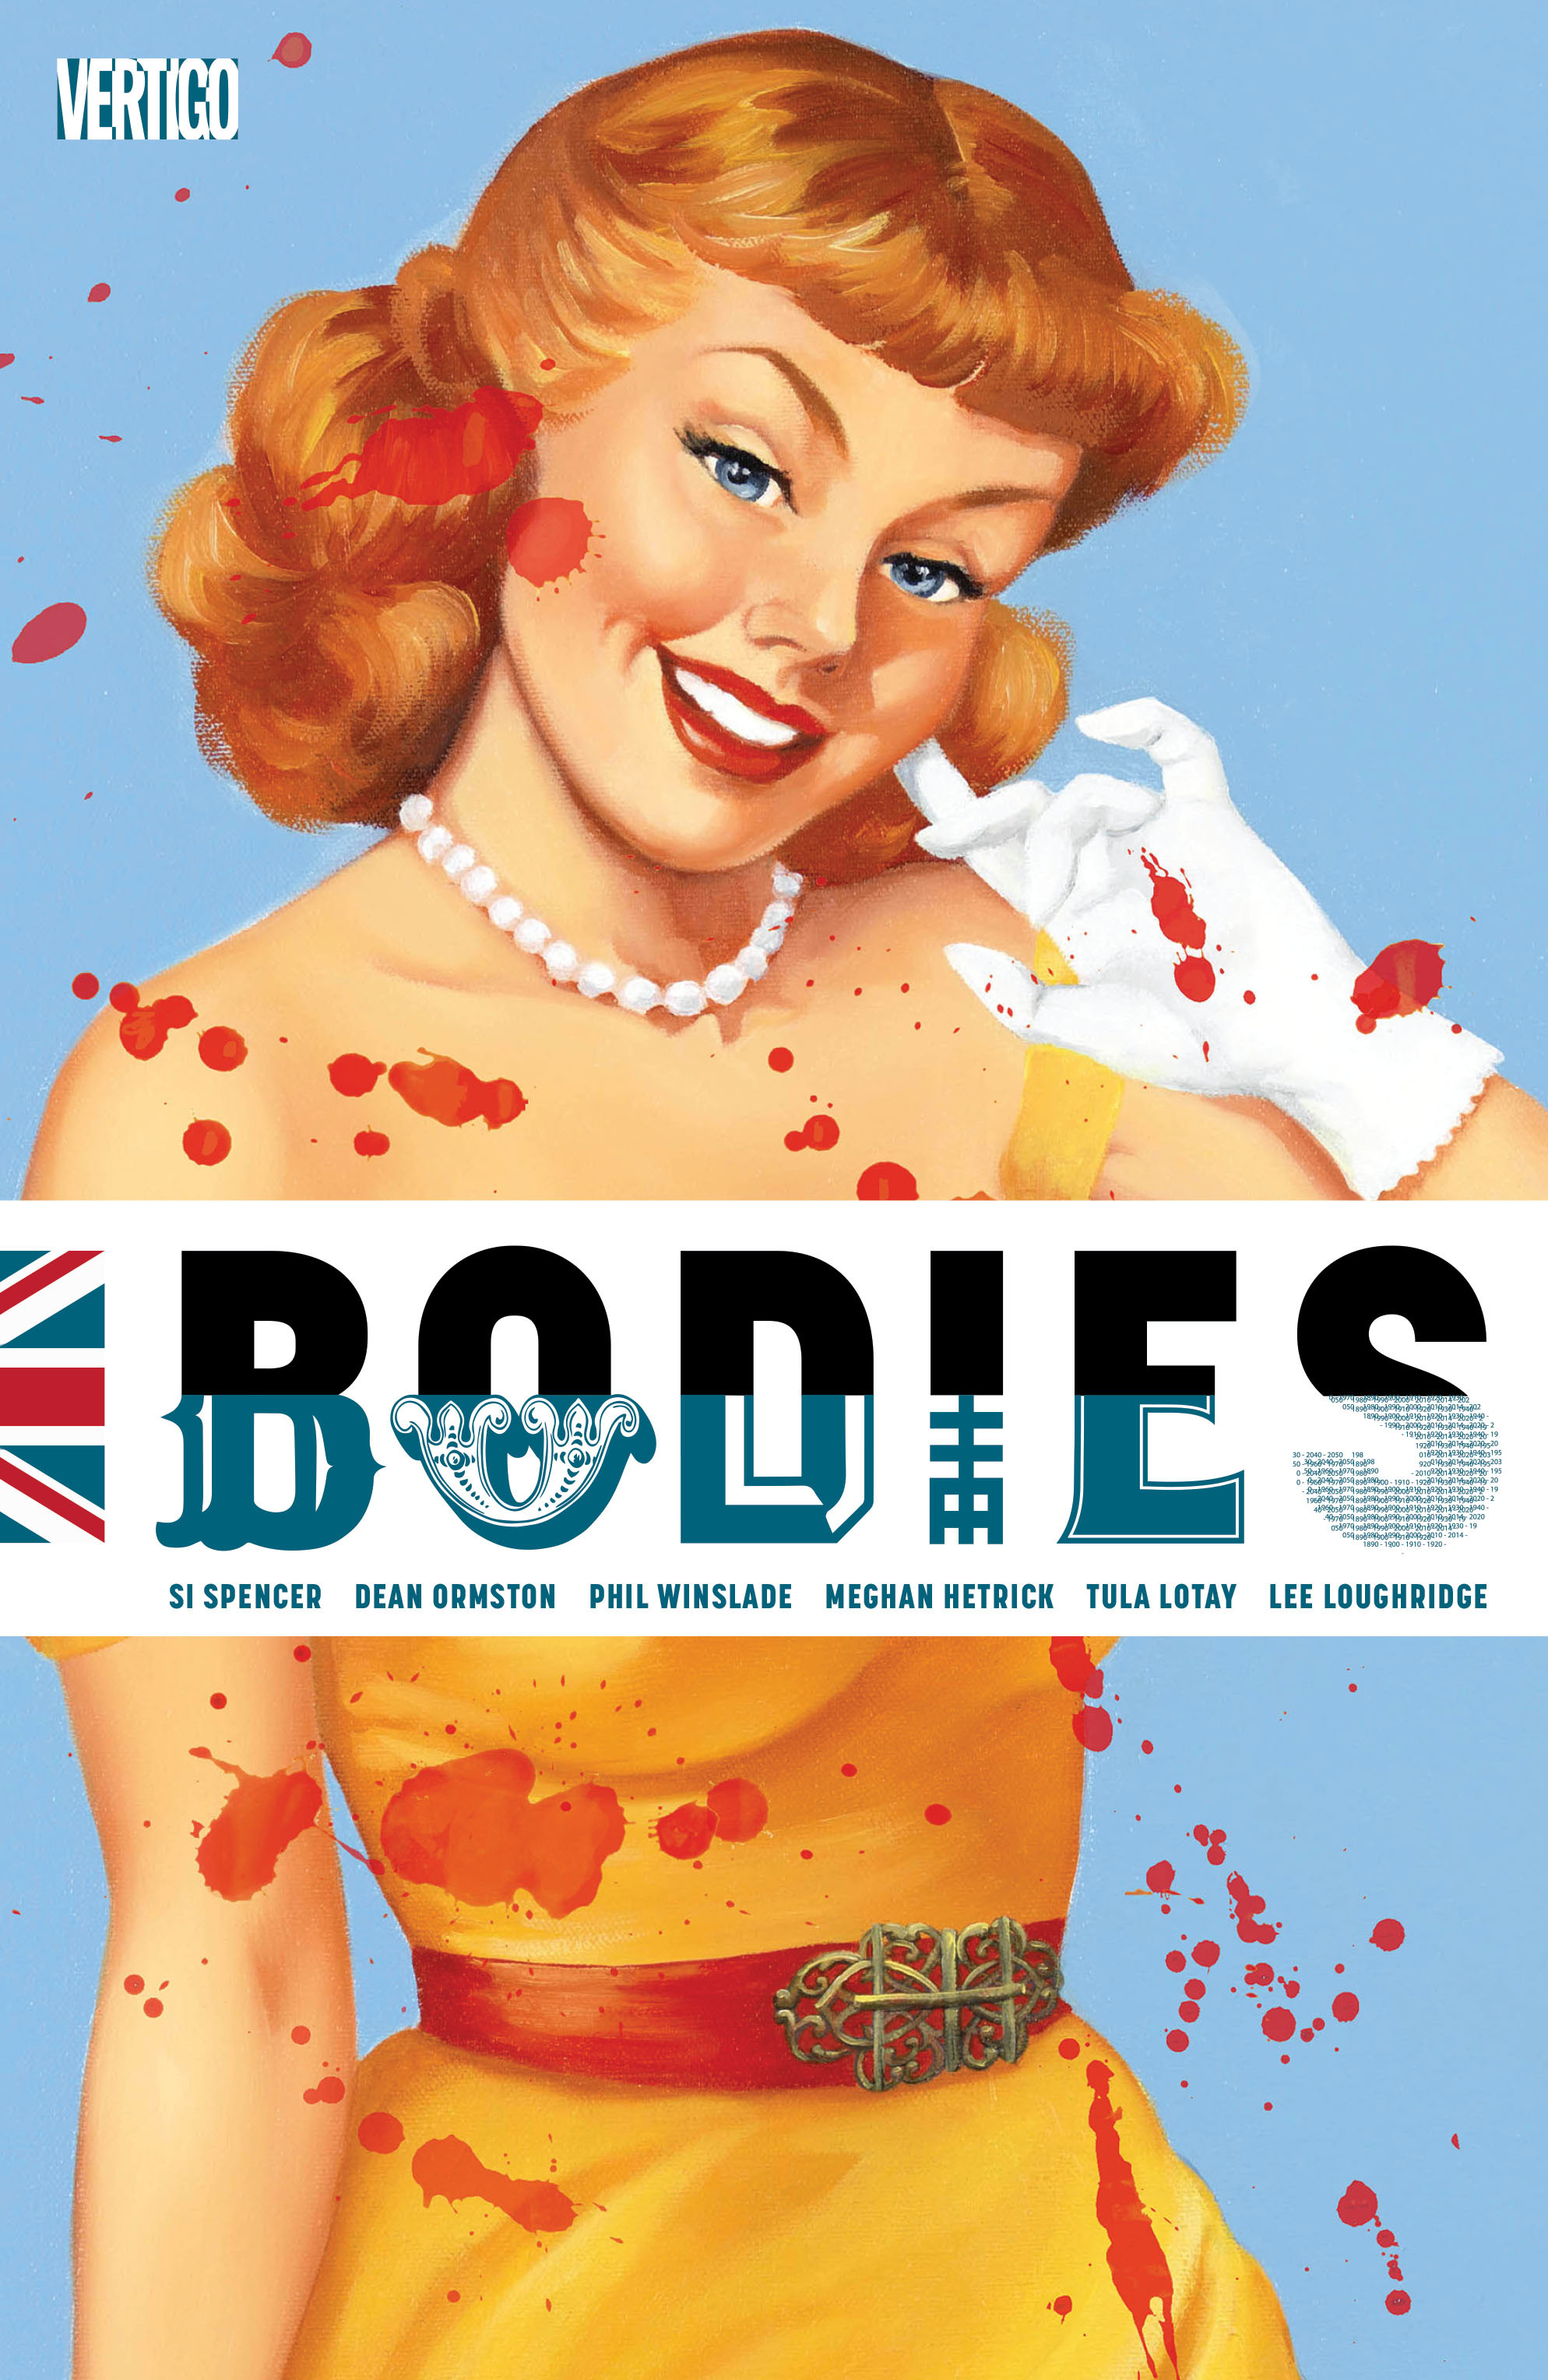 Read online Bodies comic -  Issue # TPB - 1